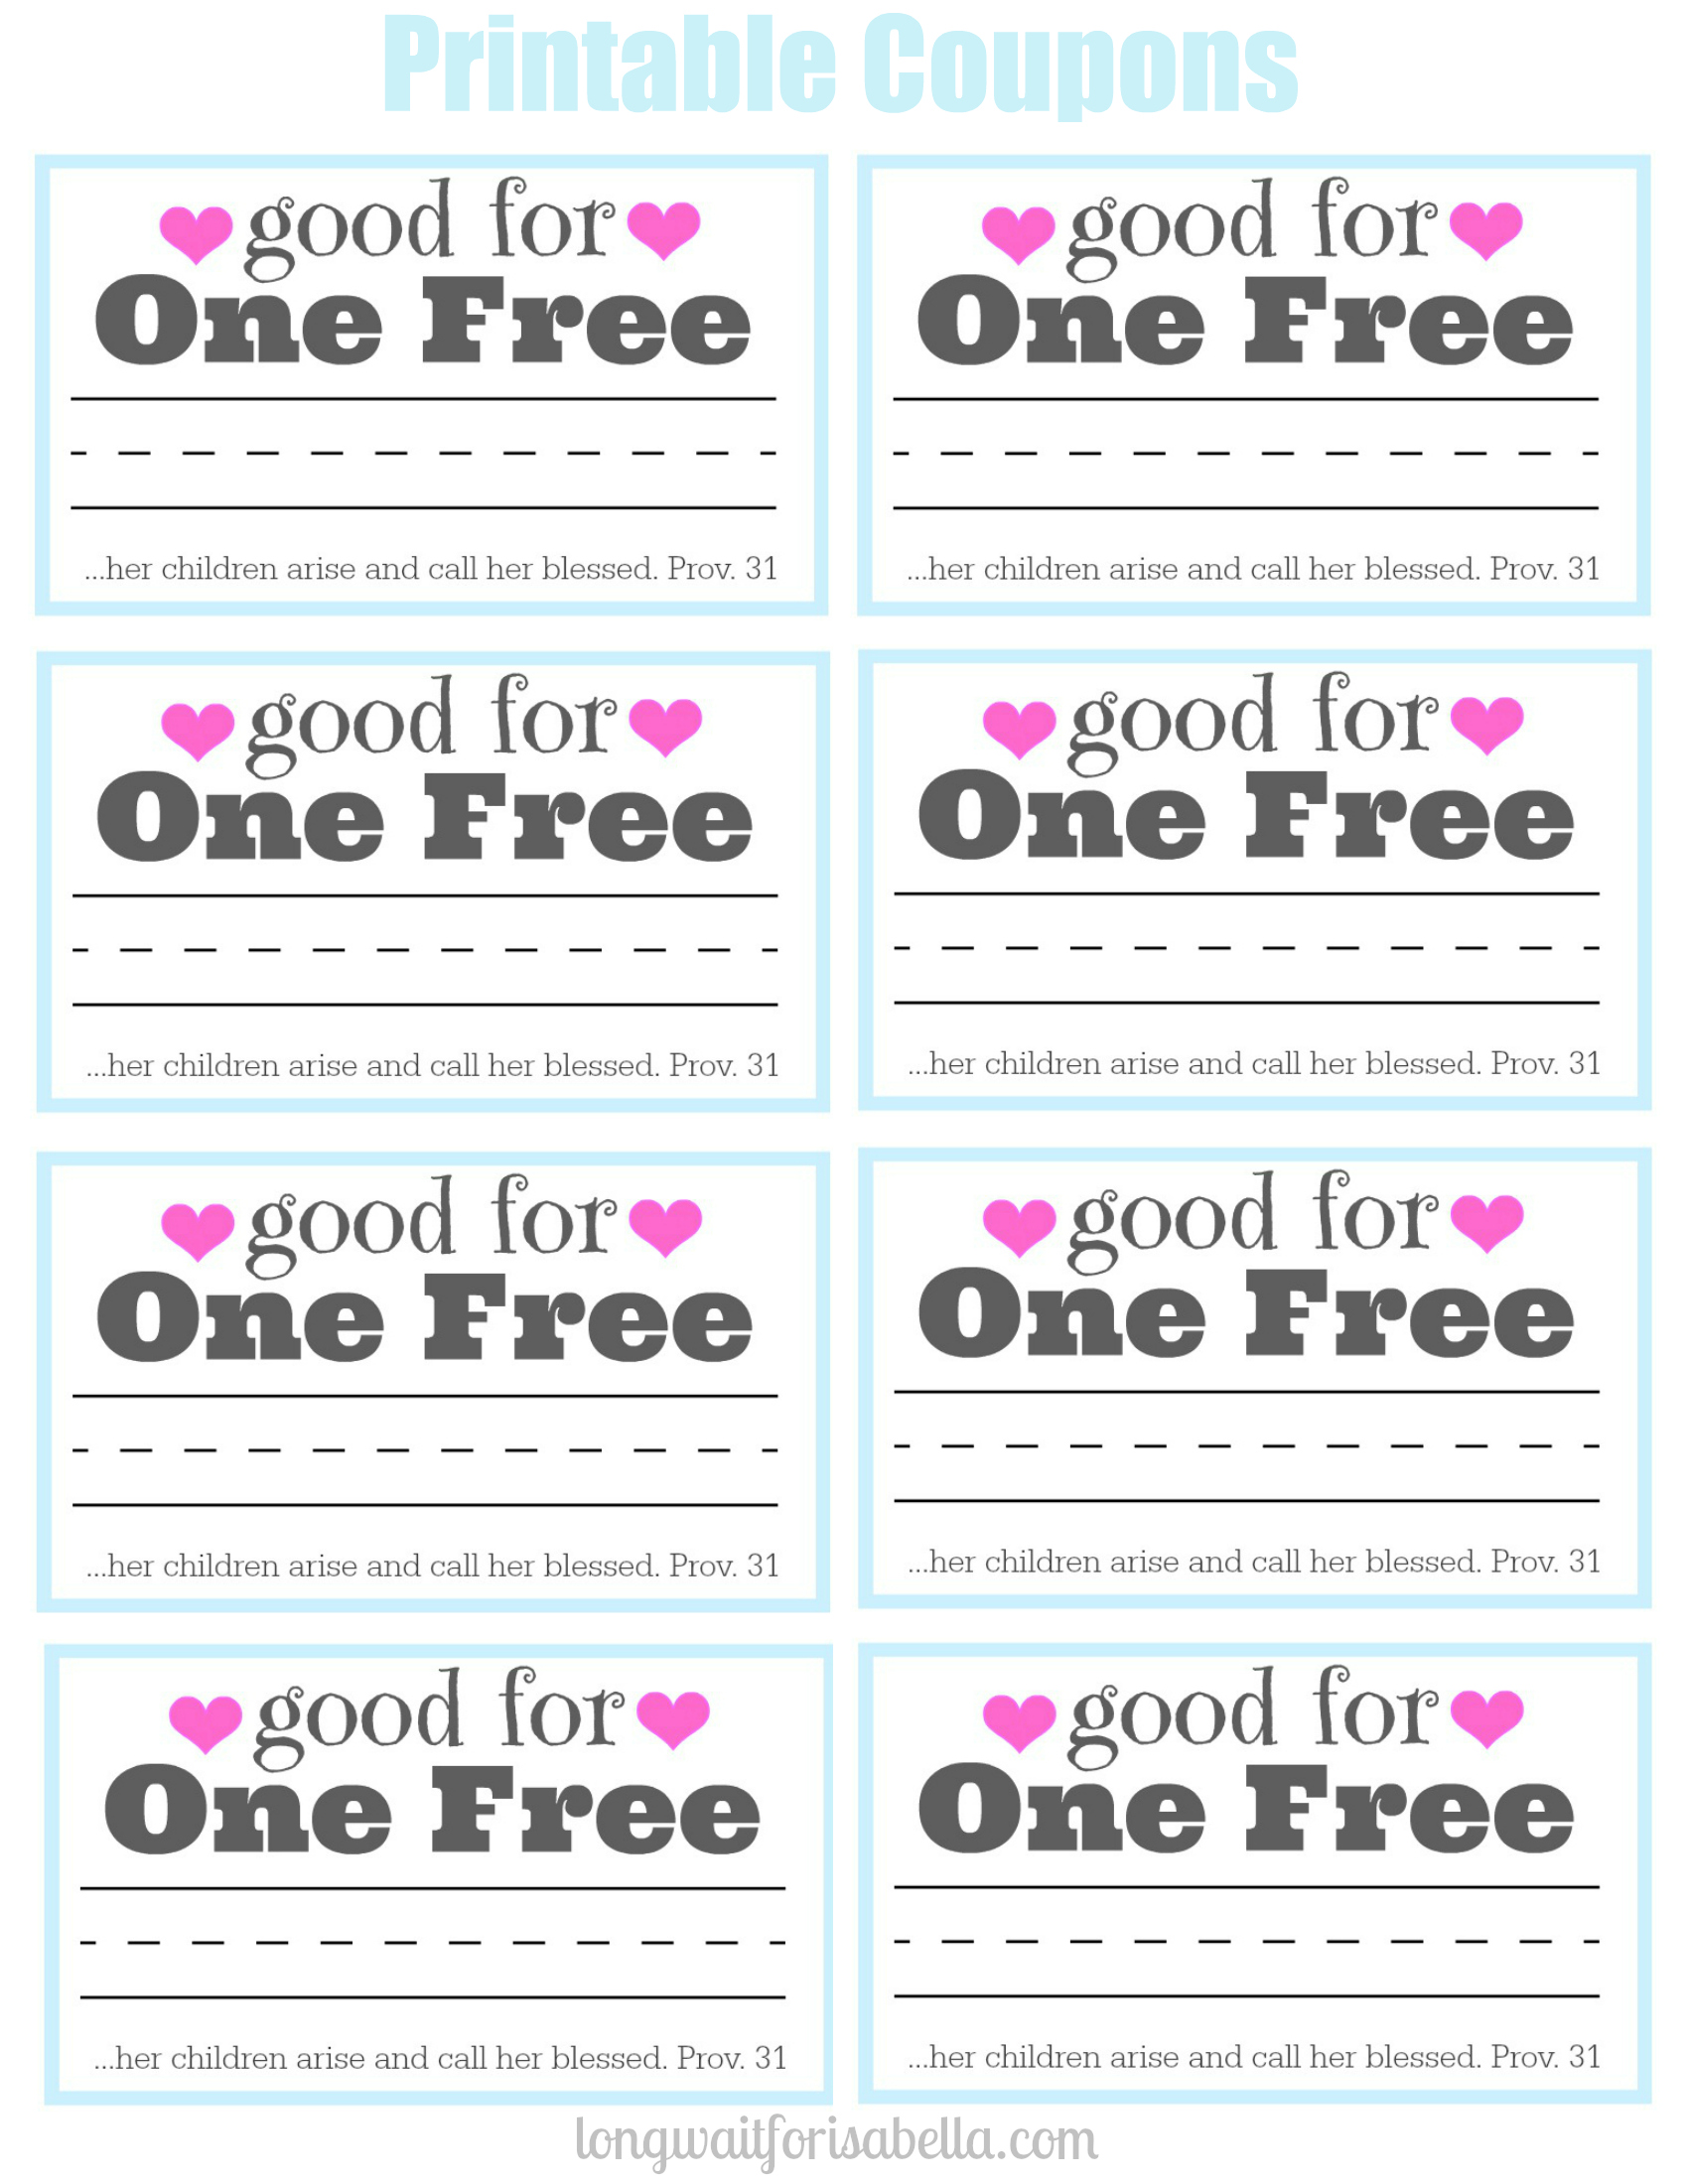 free-cooupons-free-printable-coupons-free-grocery-coupons-grocery